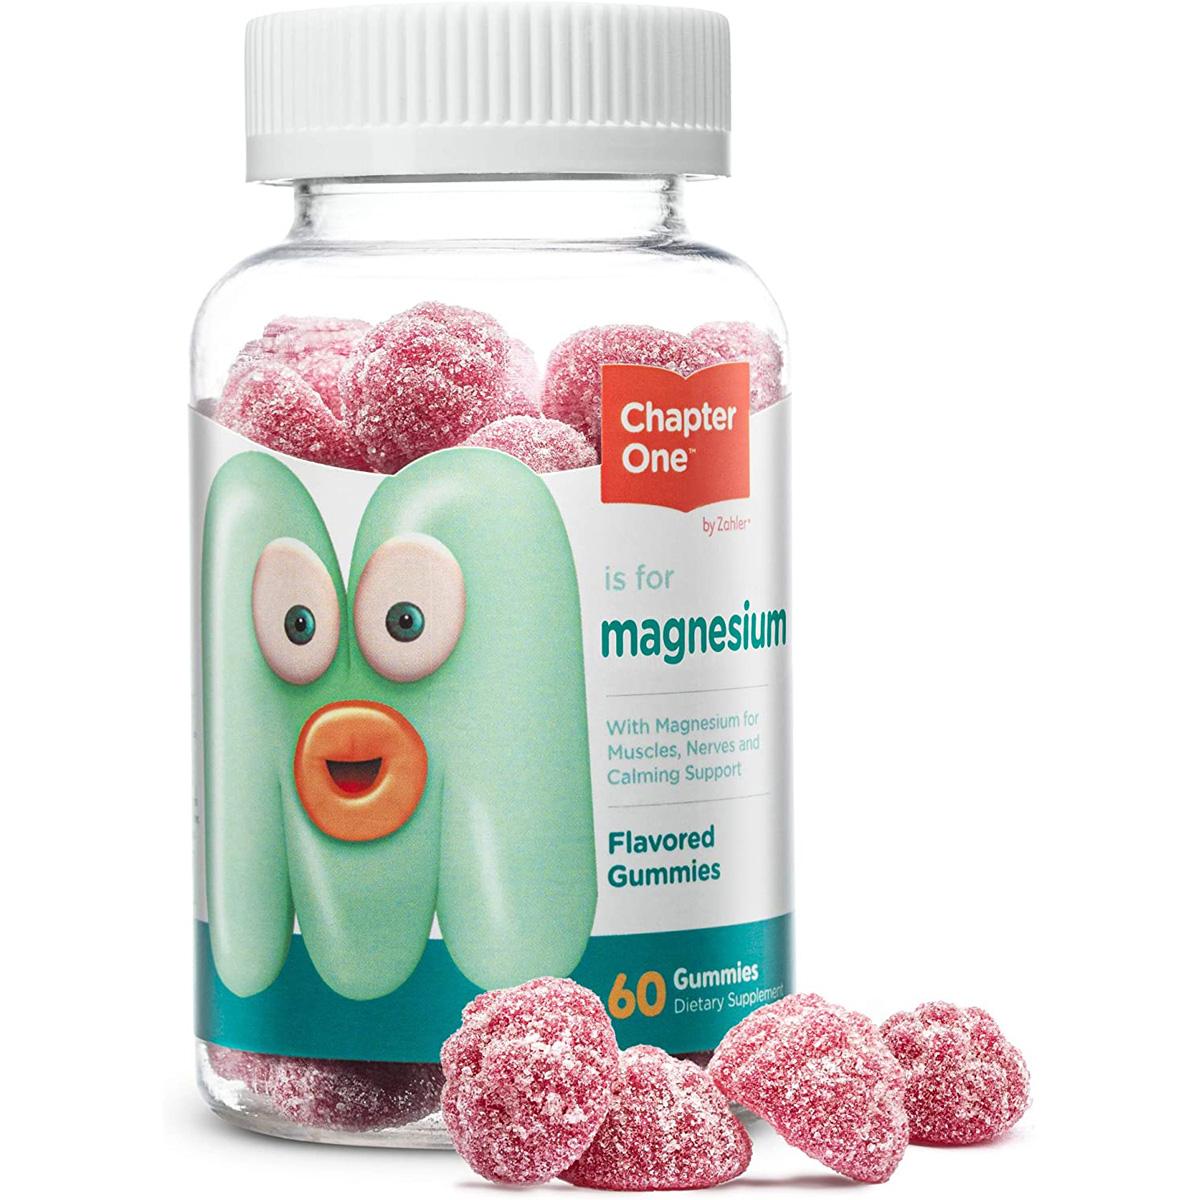 60 Chapter One Magnesium Gummies for $5.97 Shipped